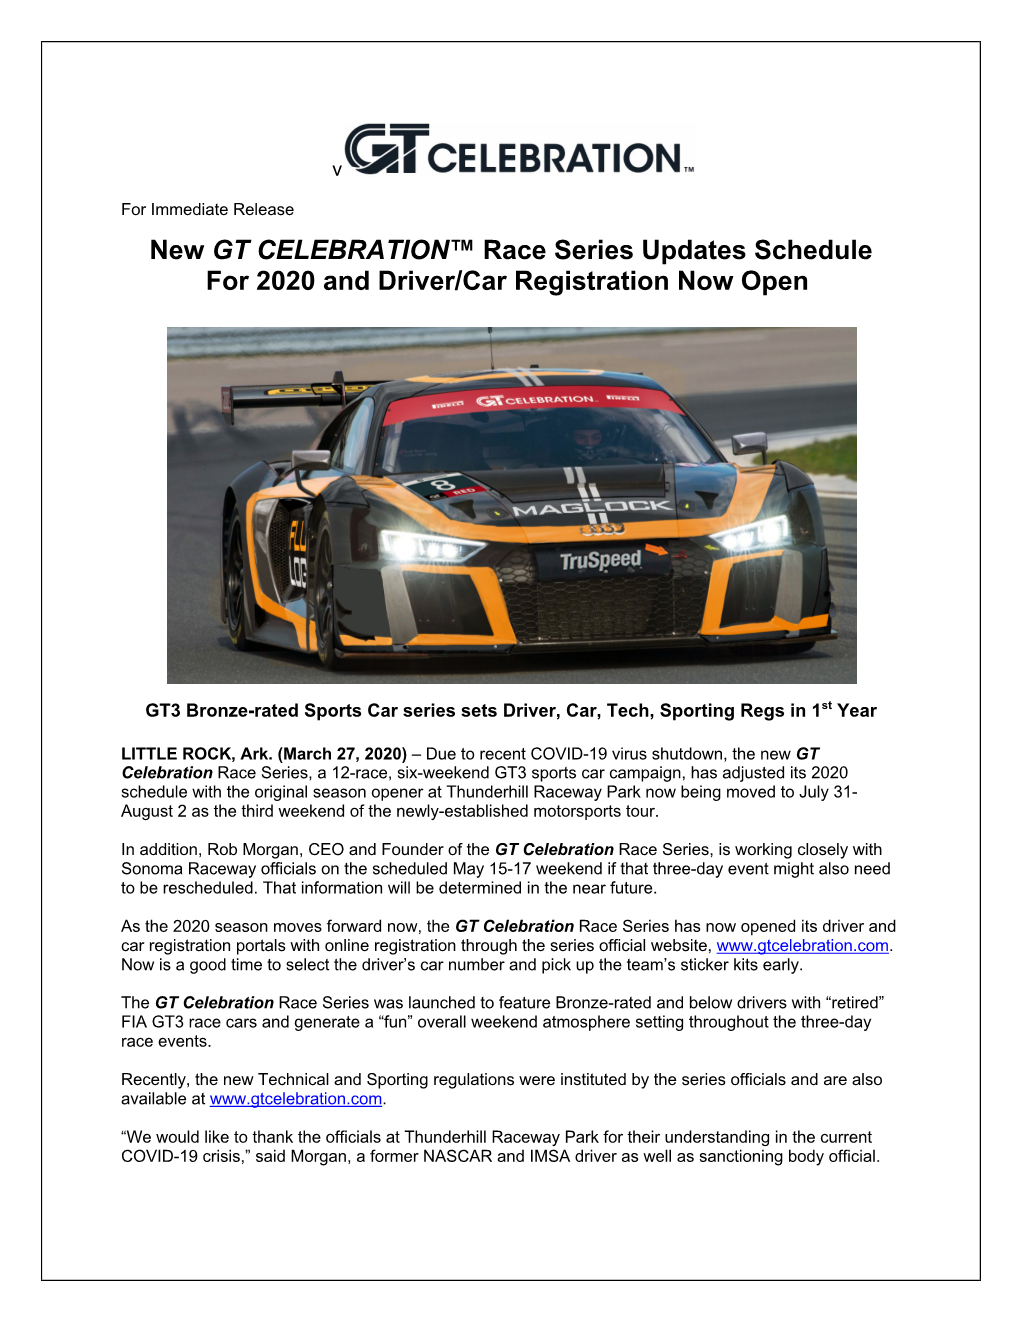 New GT CELEBRATION™ Race Series Updates Schedule for 2020 and Driver/Car Registration Now Open